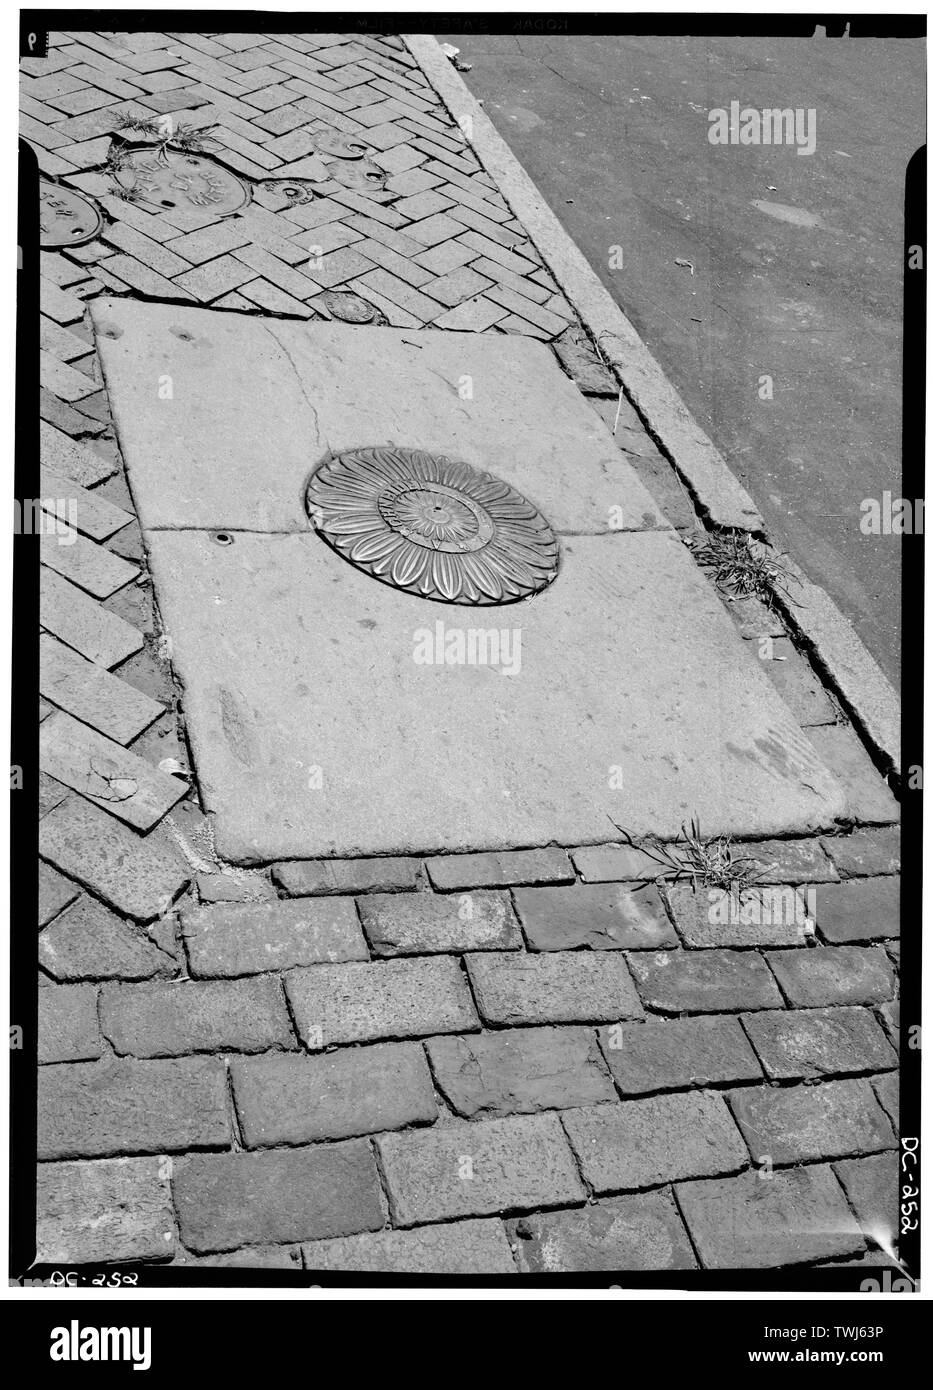 September 1969 COAL CHUTE COVER EAST SIDE OF 31st STREET, NORTH OF M STREET - Georgetown Street Furniture, Georgetown Vicinity, Washington, District of Columbia, DC Stock Photo